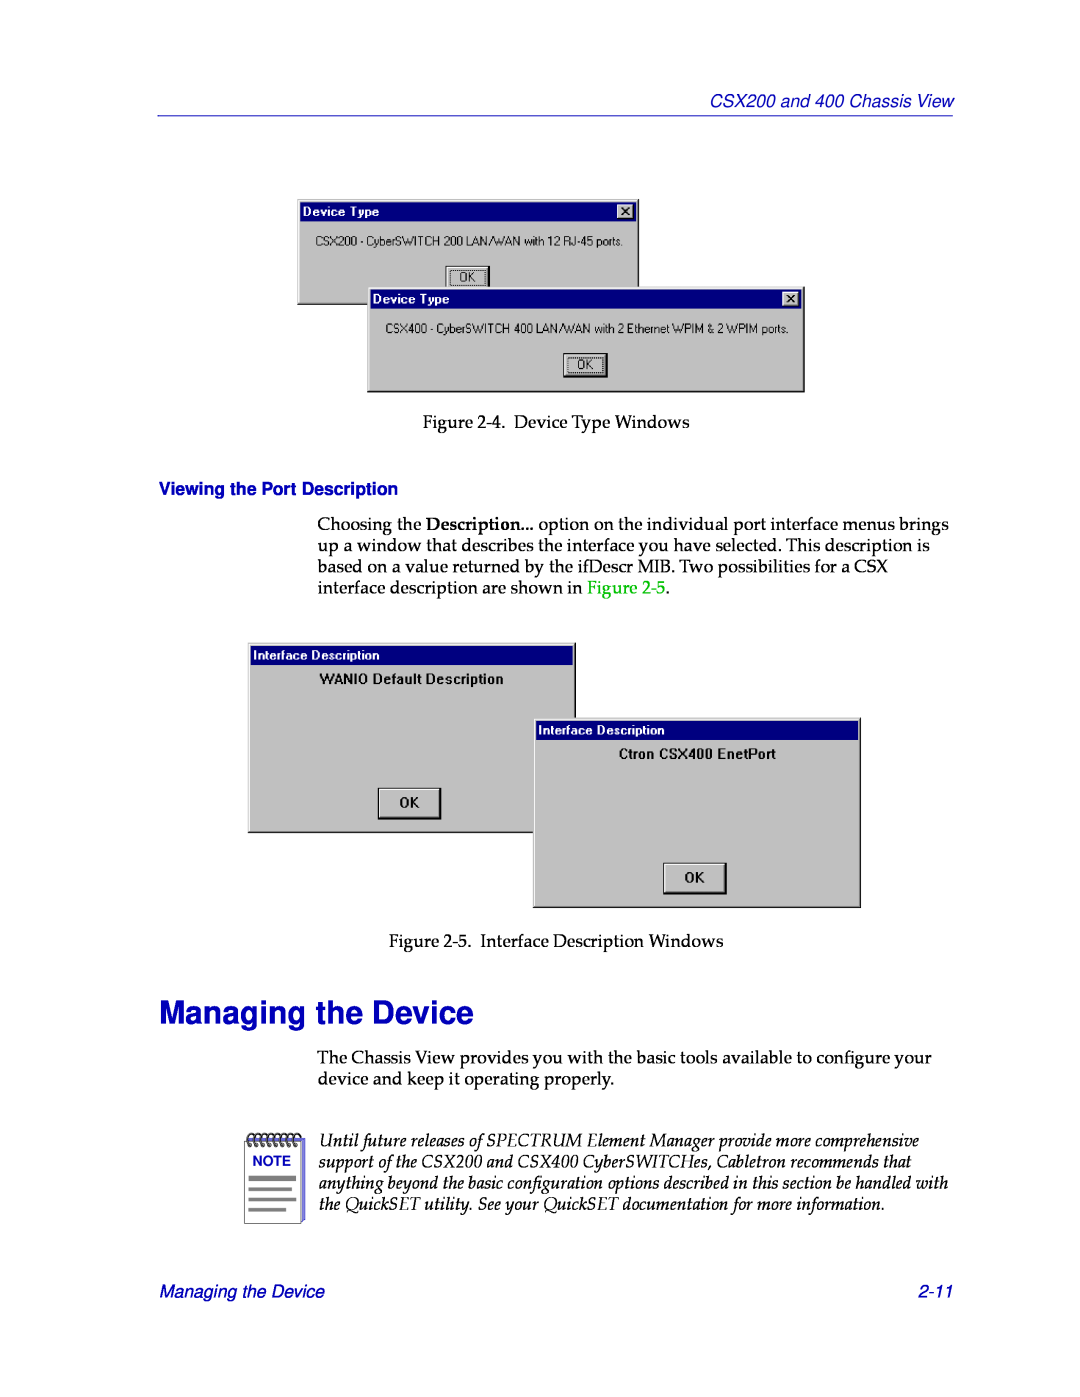 Cabletron Systems CSX400 manual Managing the Device, Viewing the Port Description, 2-11, CSX200 and 400 Chassis View 